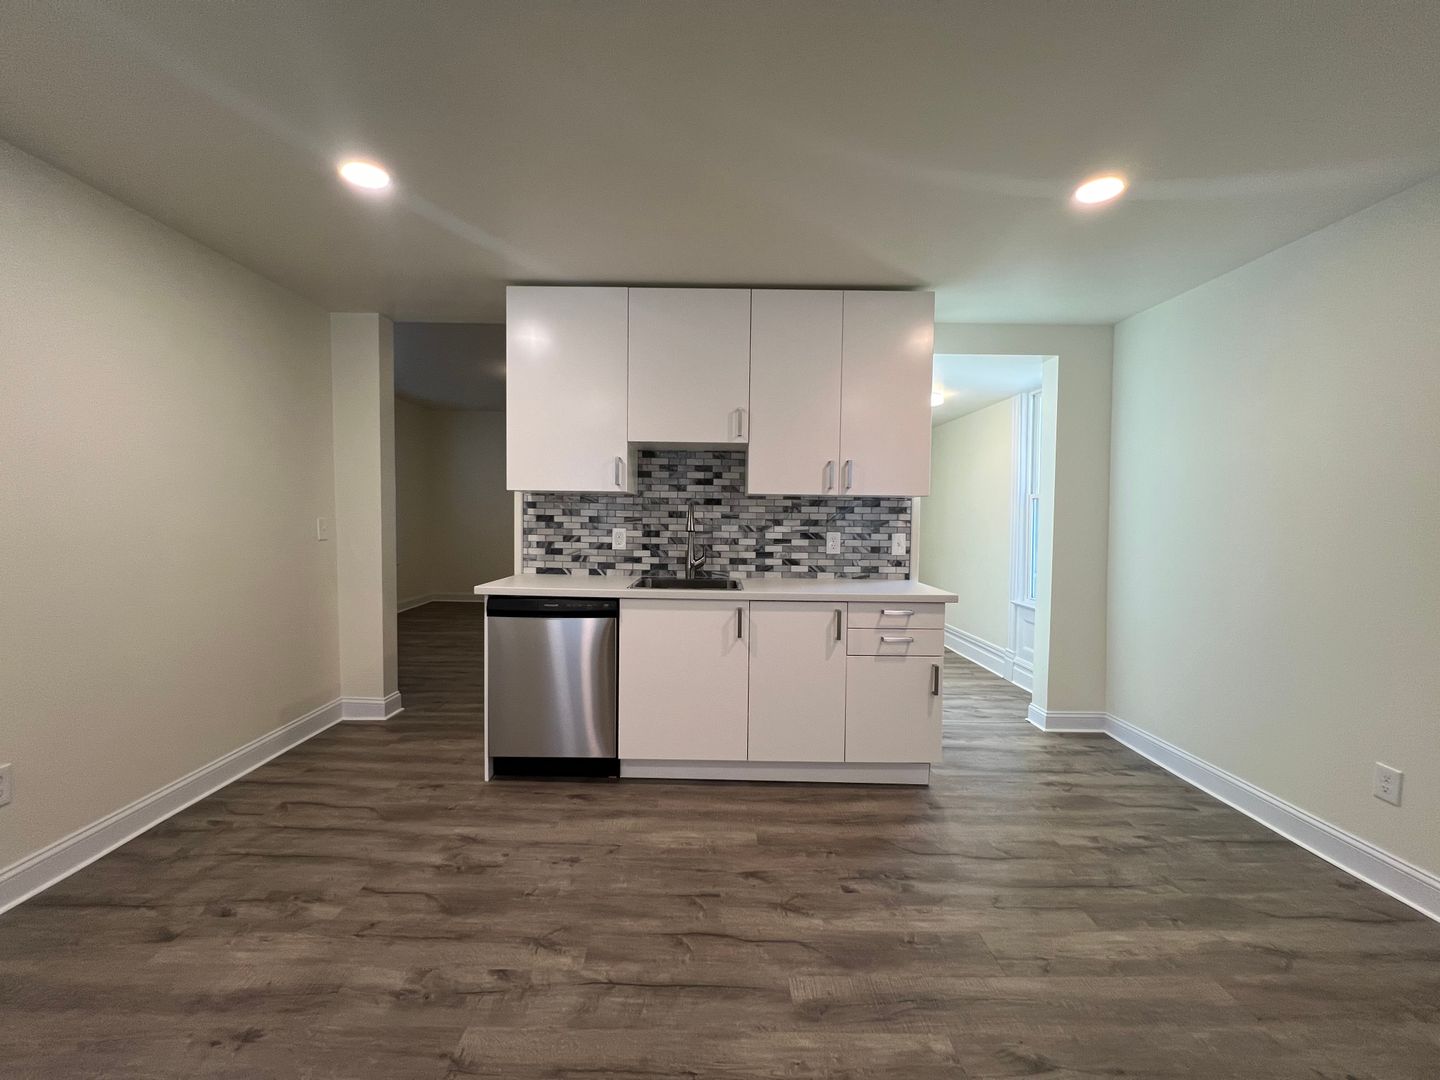 Updated 2BR Apartment Now Showing for June!